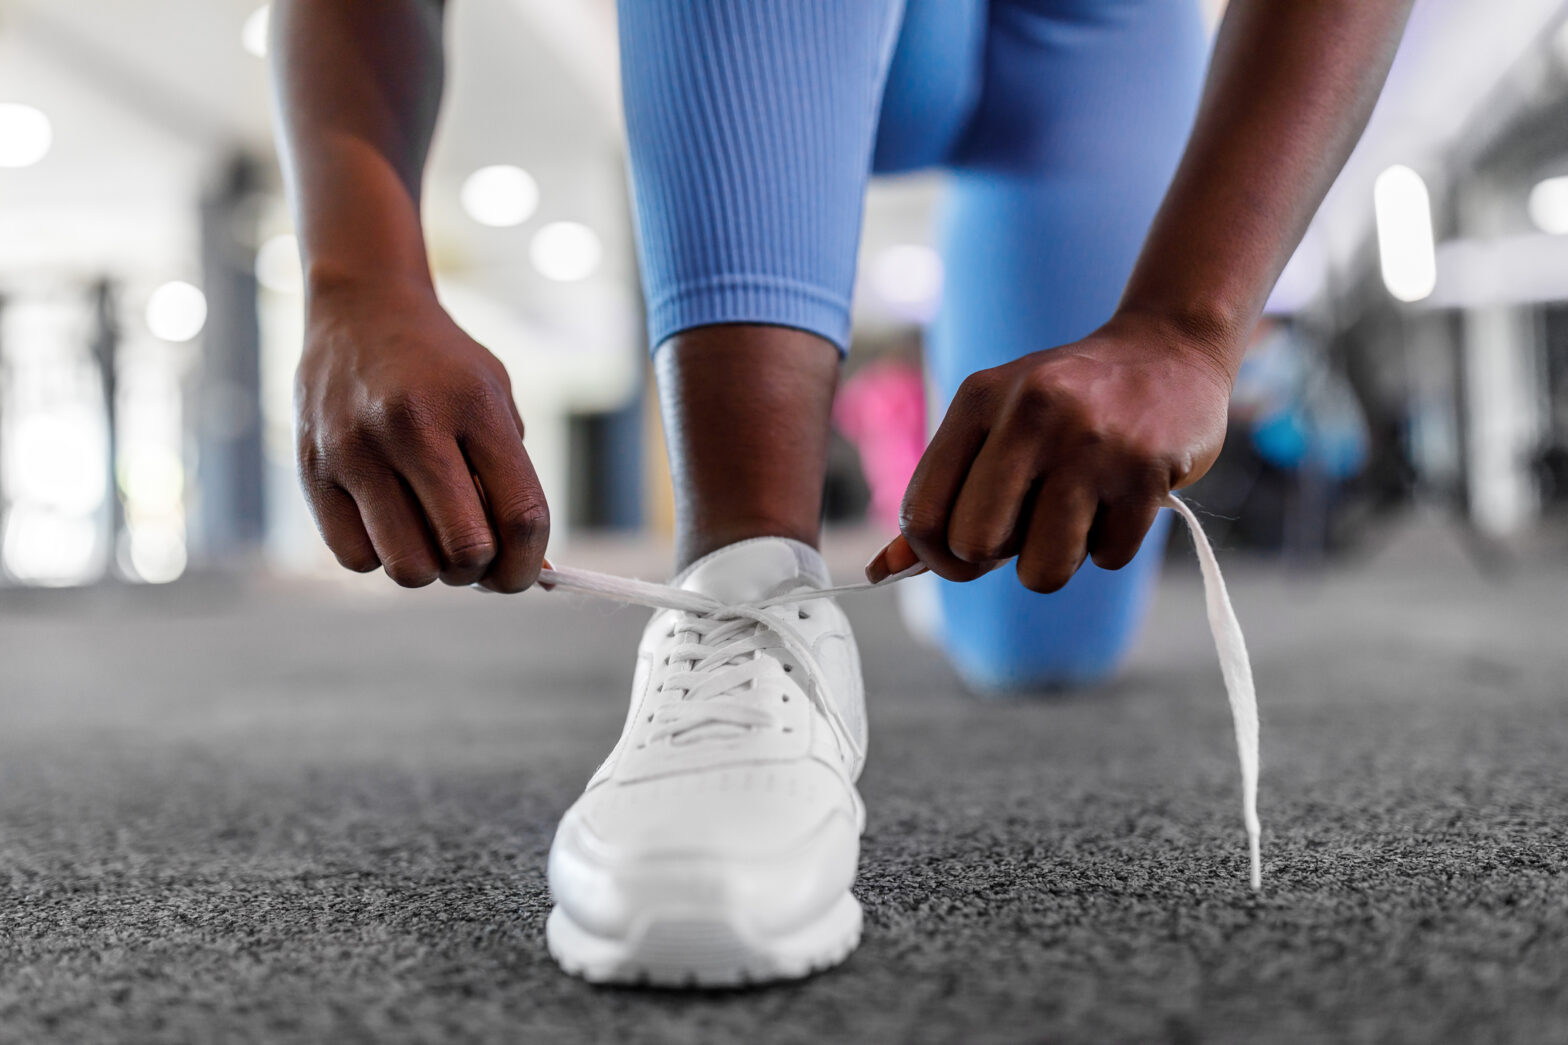 A young female athlete is tying shoelaces in a gym.